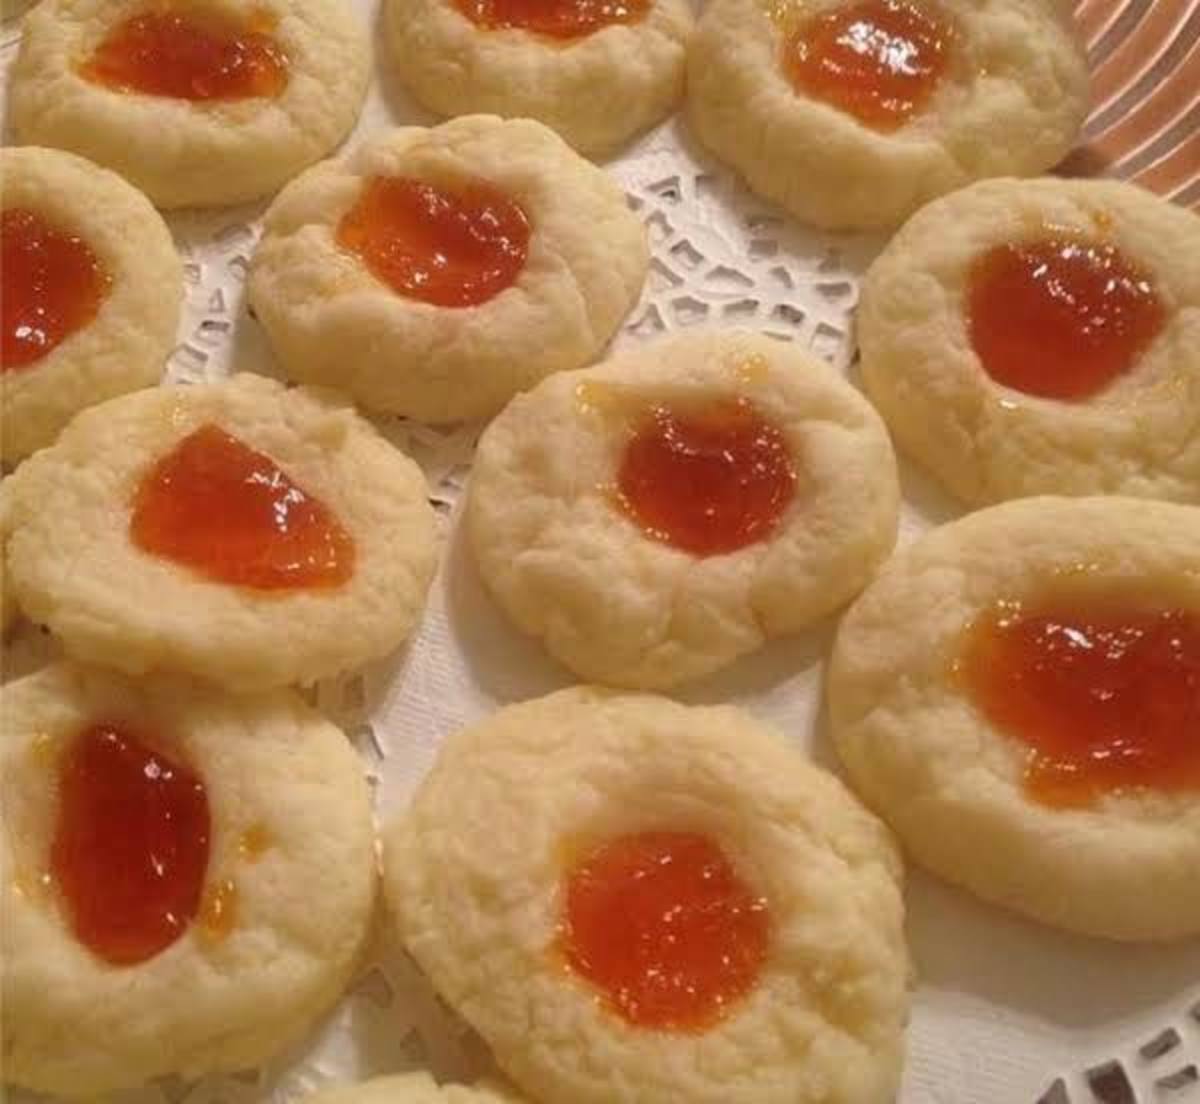 apricot cookies